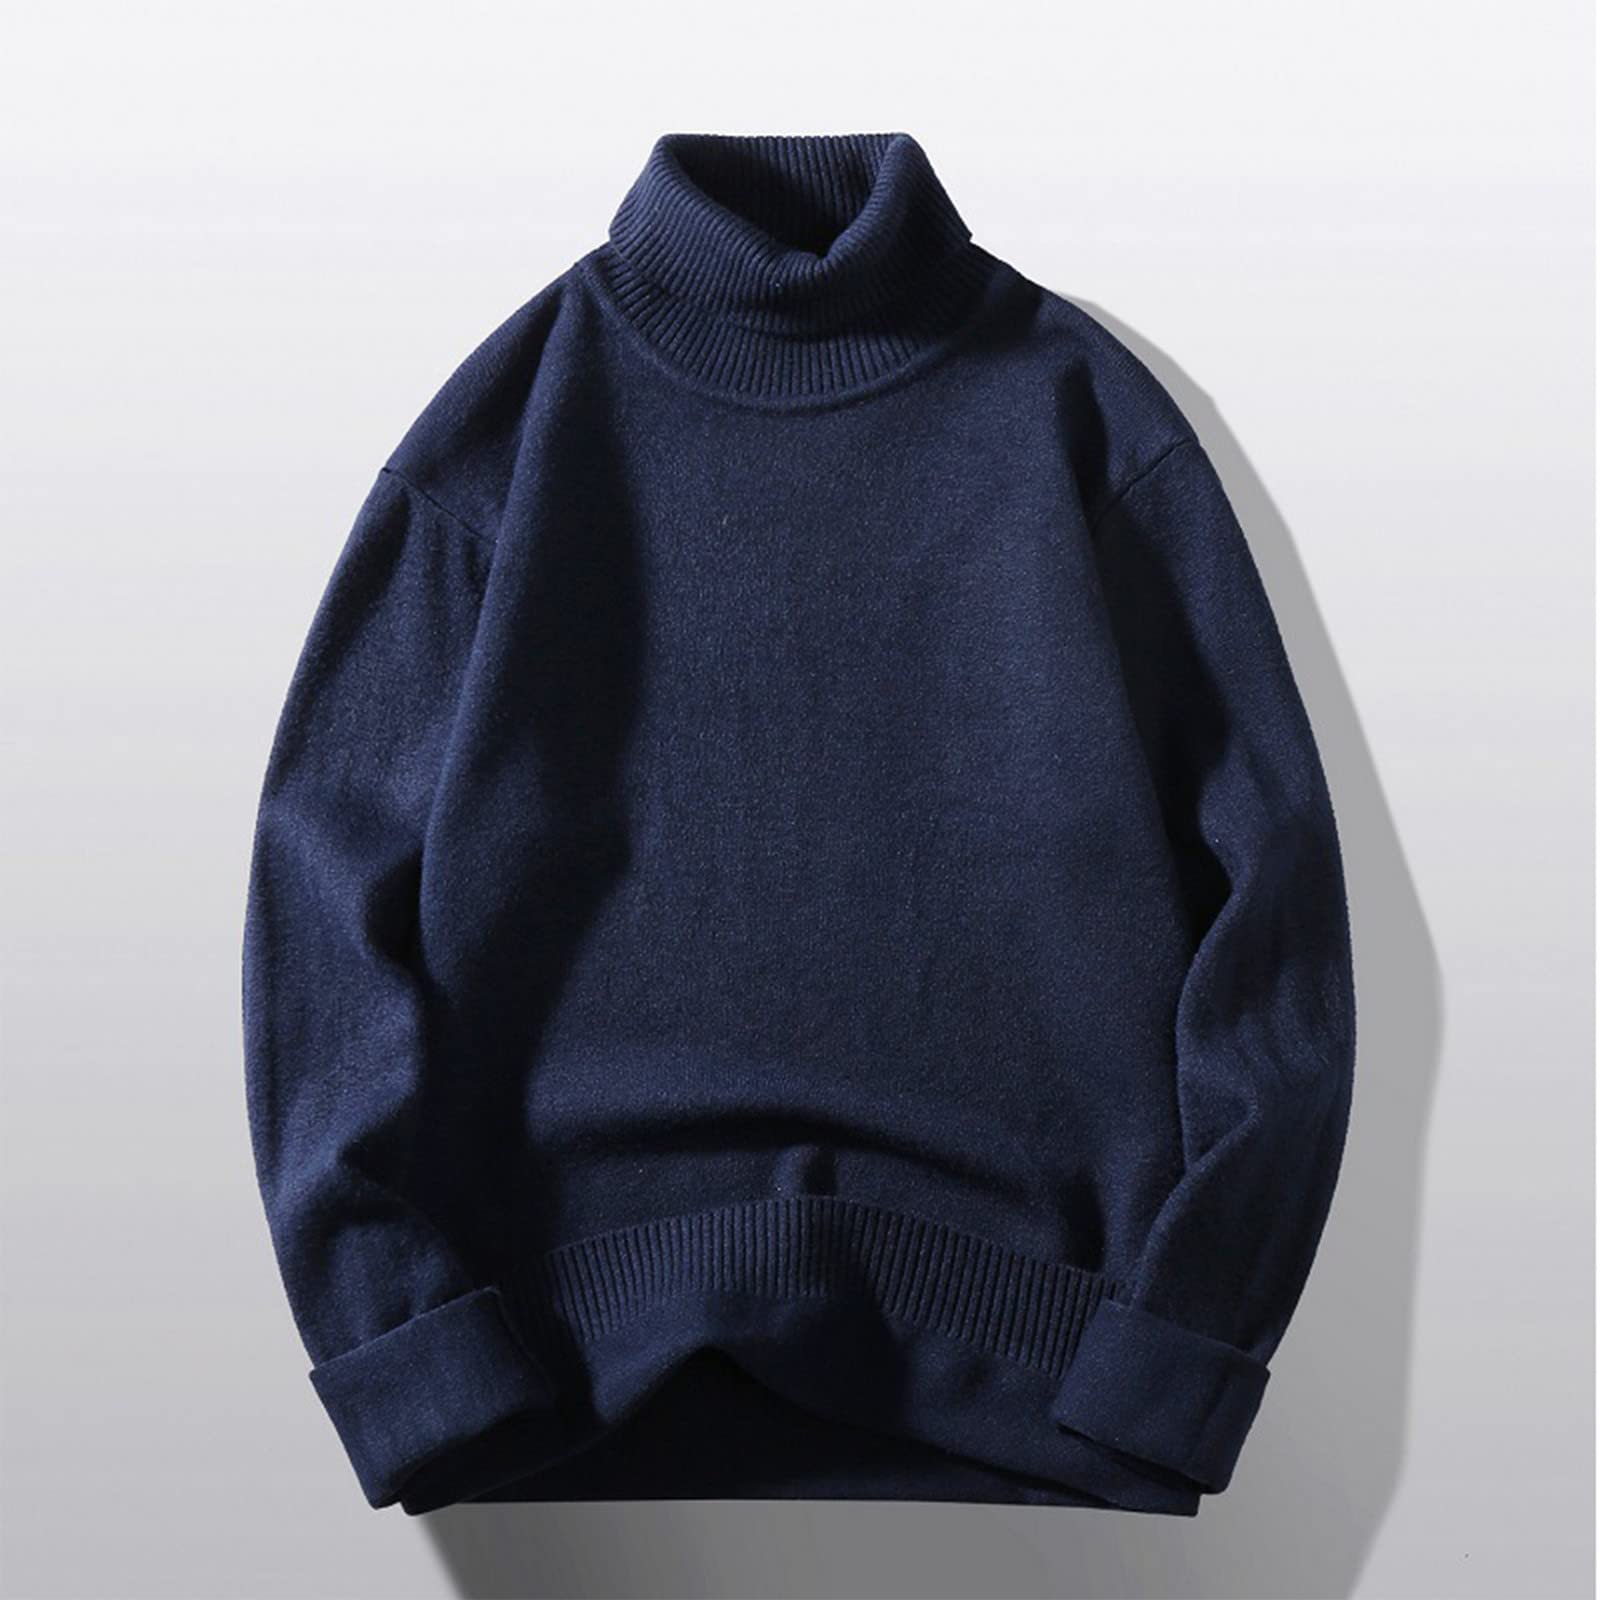 XIAXOGOOL Men Sweaters Fashion,Mens Turtleneck Sweater Pullover Casual Loose Fit Winter Long Sleeve Cable Knit Sweaters